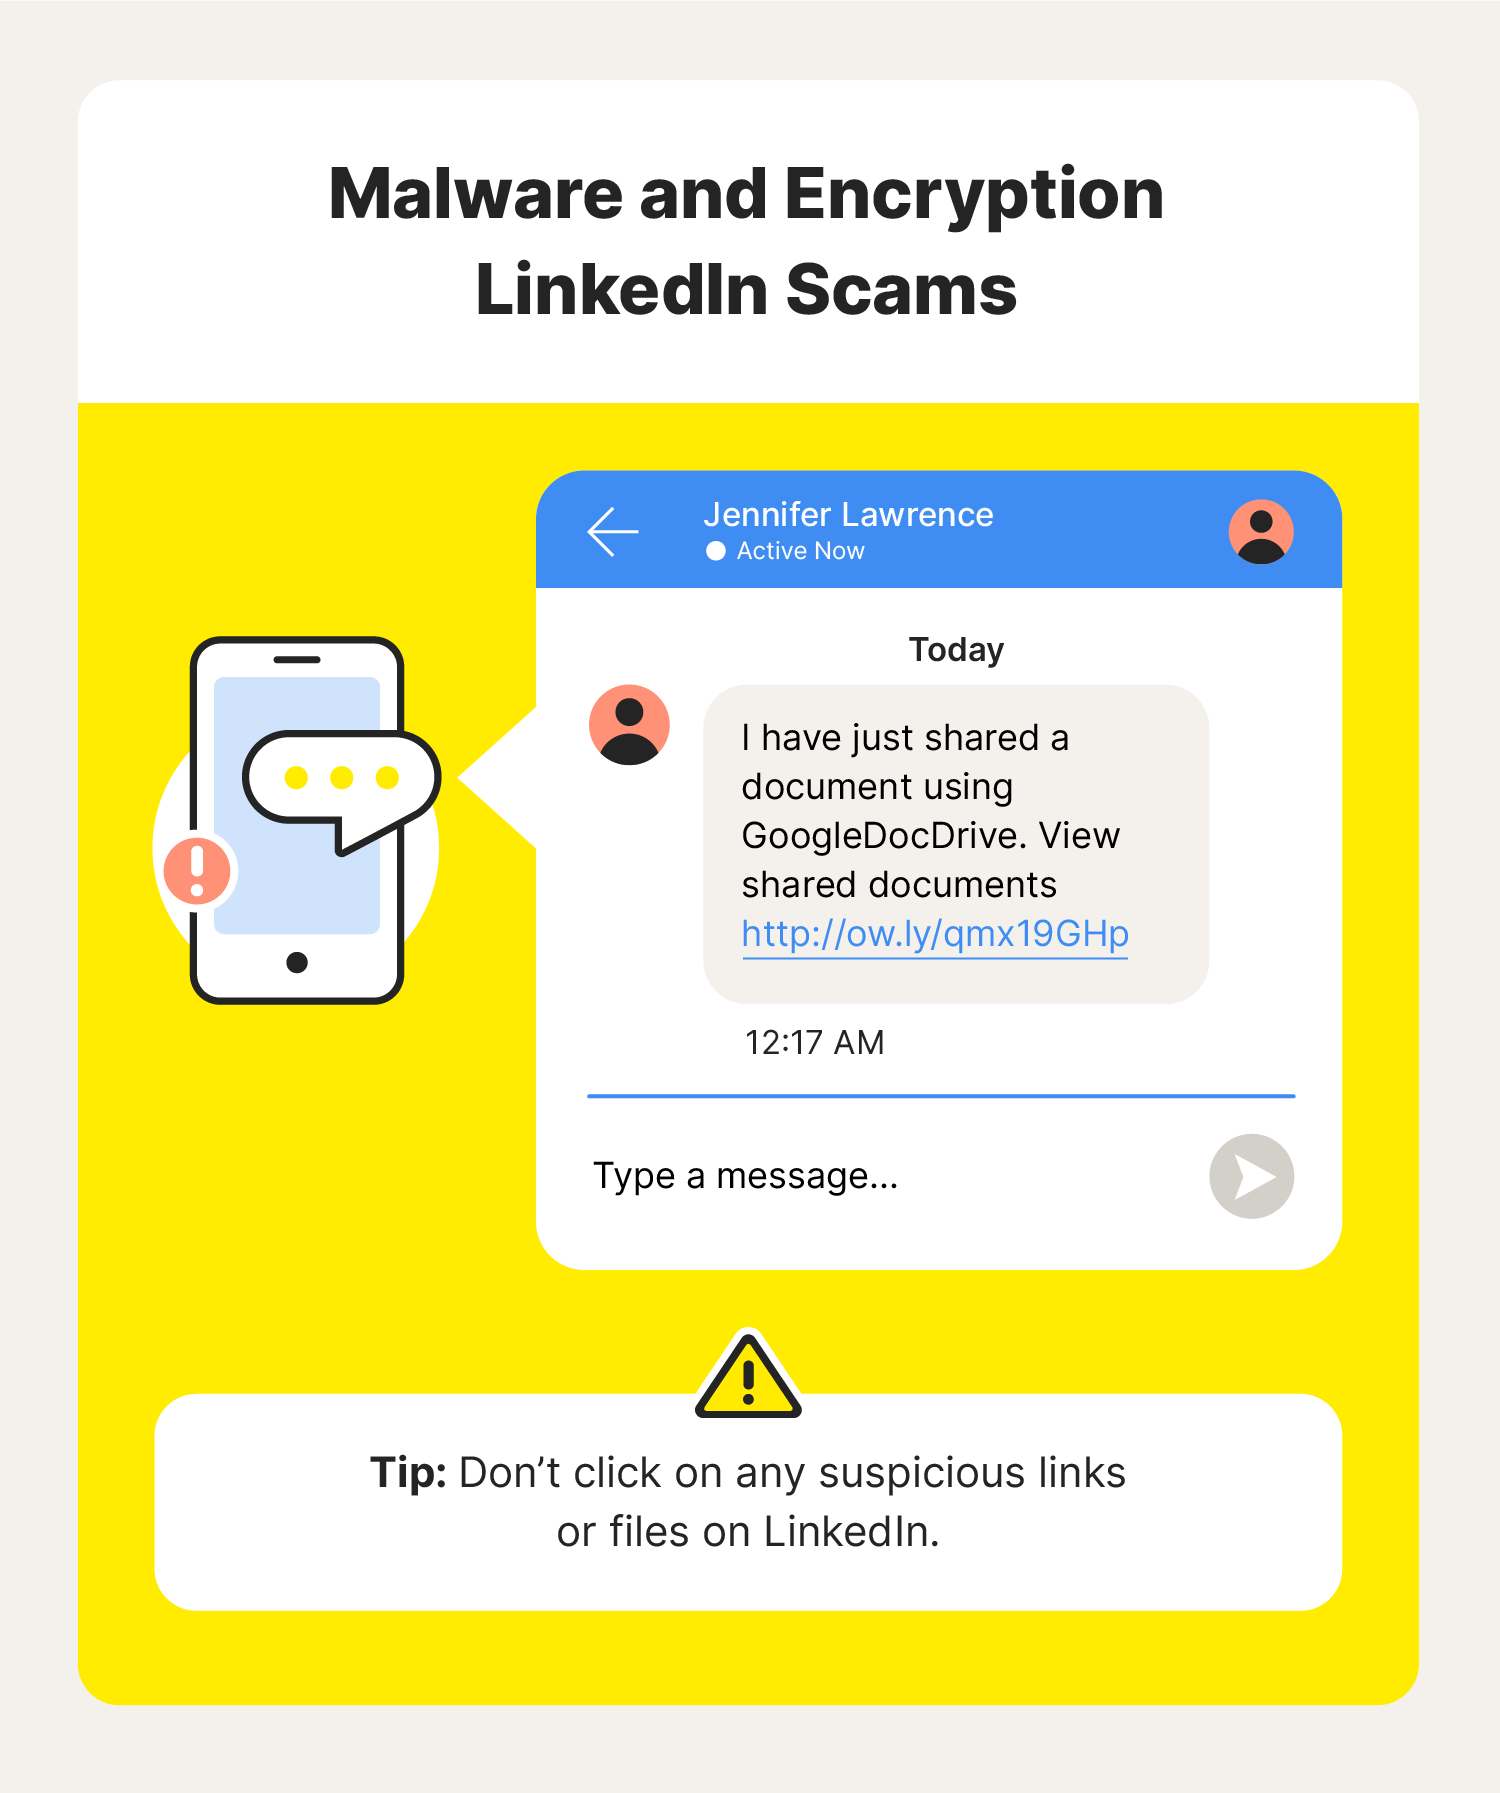 A graphic shows a malware and encryption LinkedIn scam message.